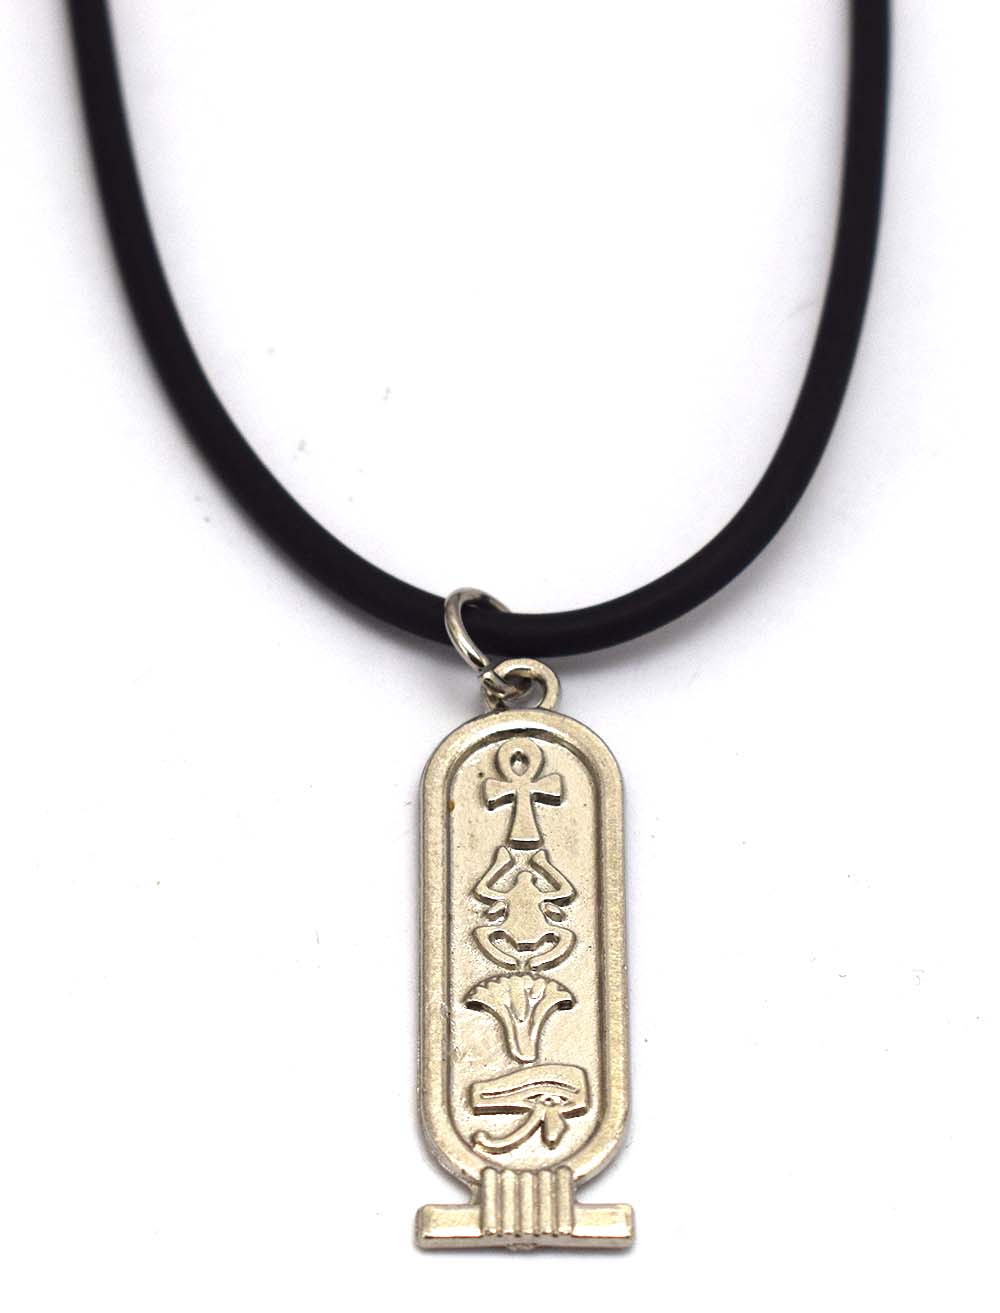 immatgar pharaonic Egyptian cartridge necklace jewellery Egyptian souvenirs gifts for Women Girls ( Silver )